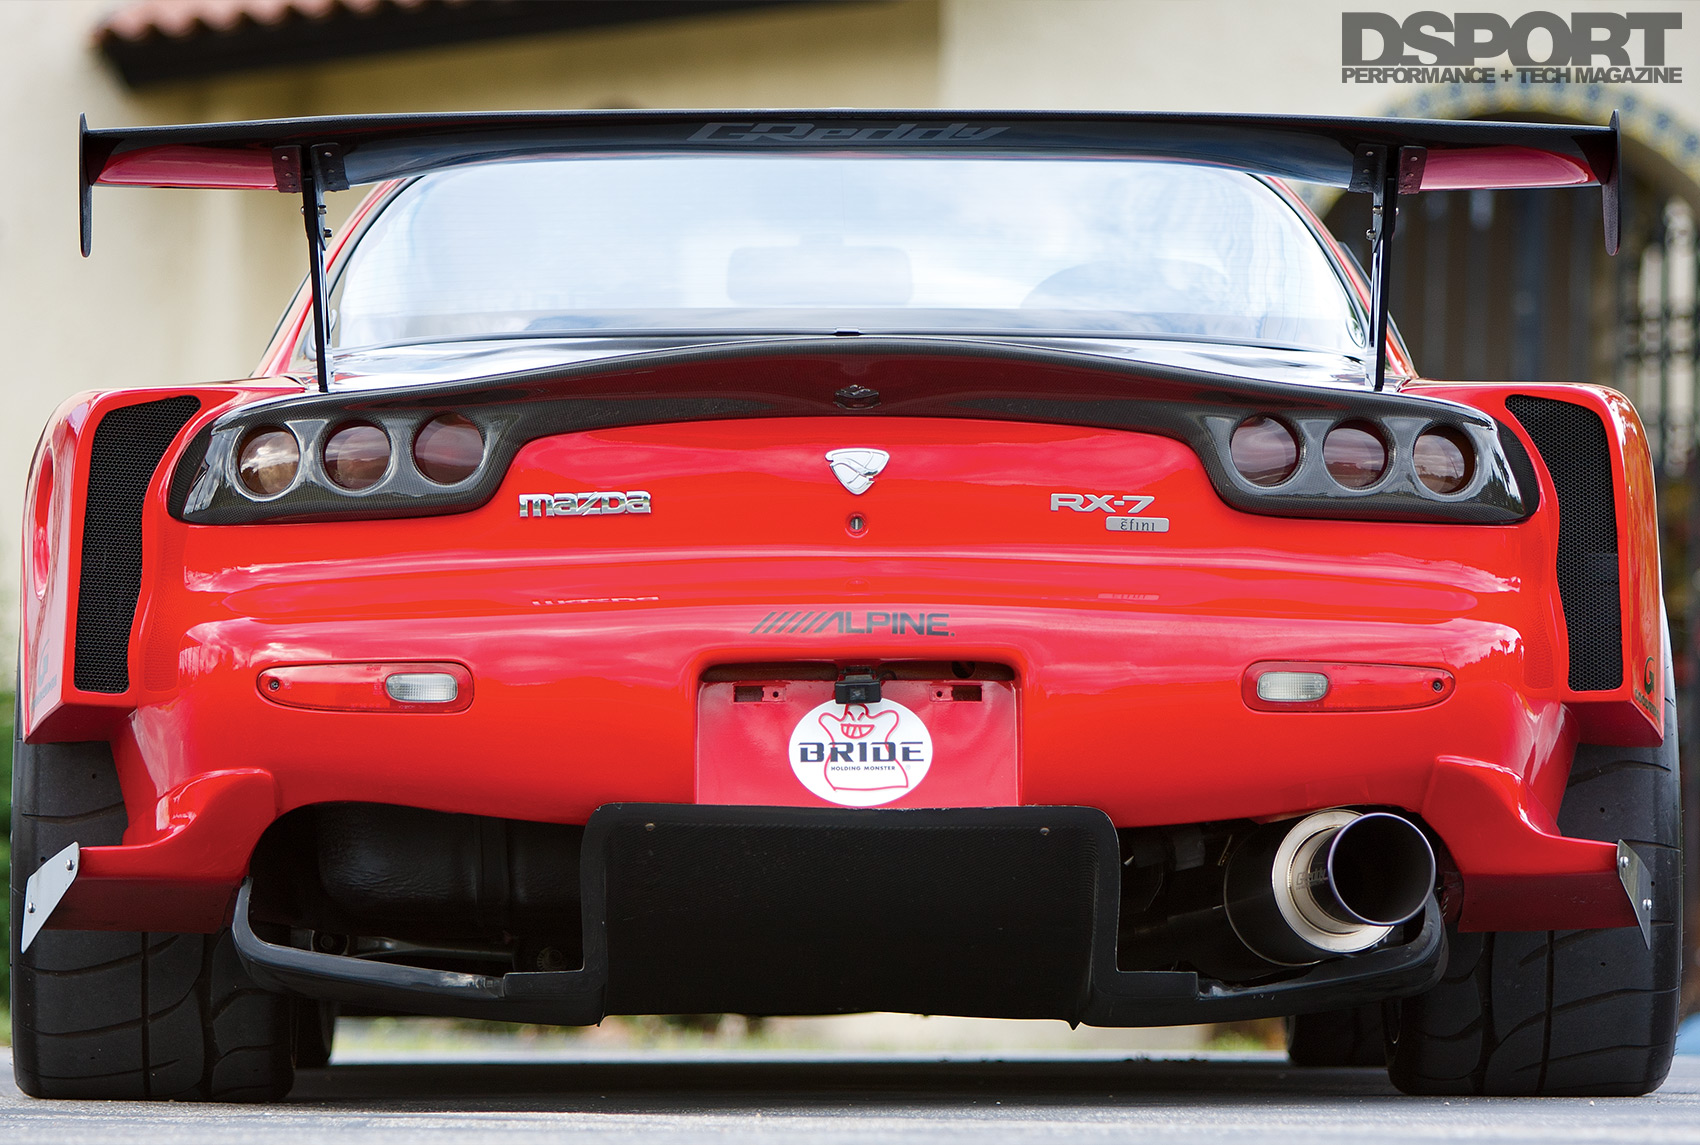 Rear of the Wide-Body Mazda RX-7.